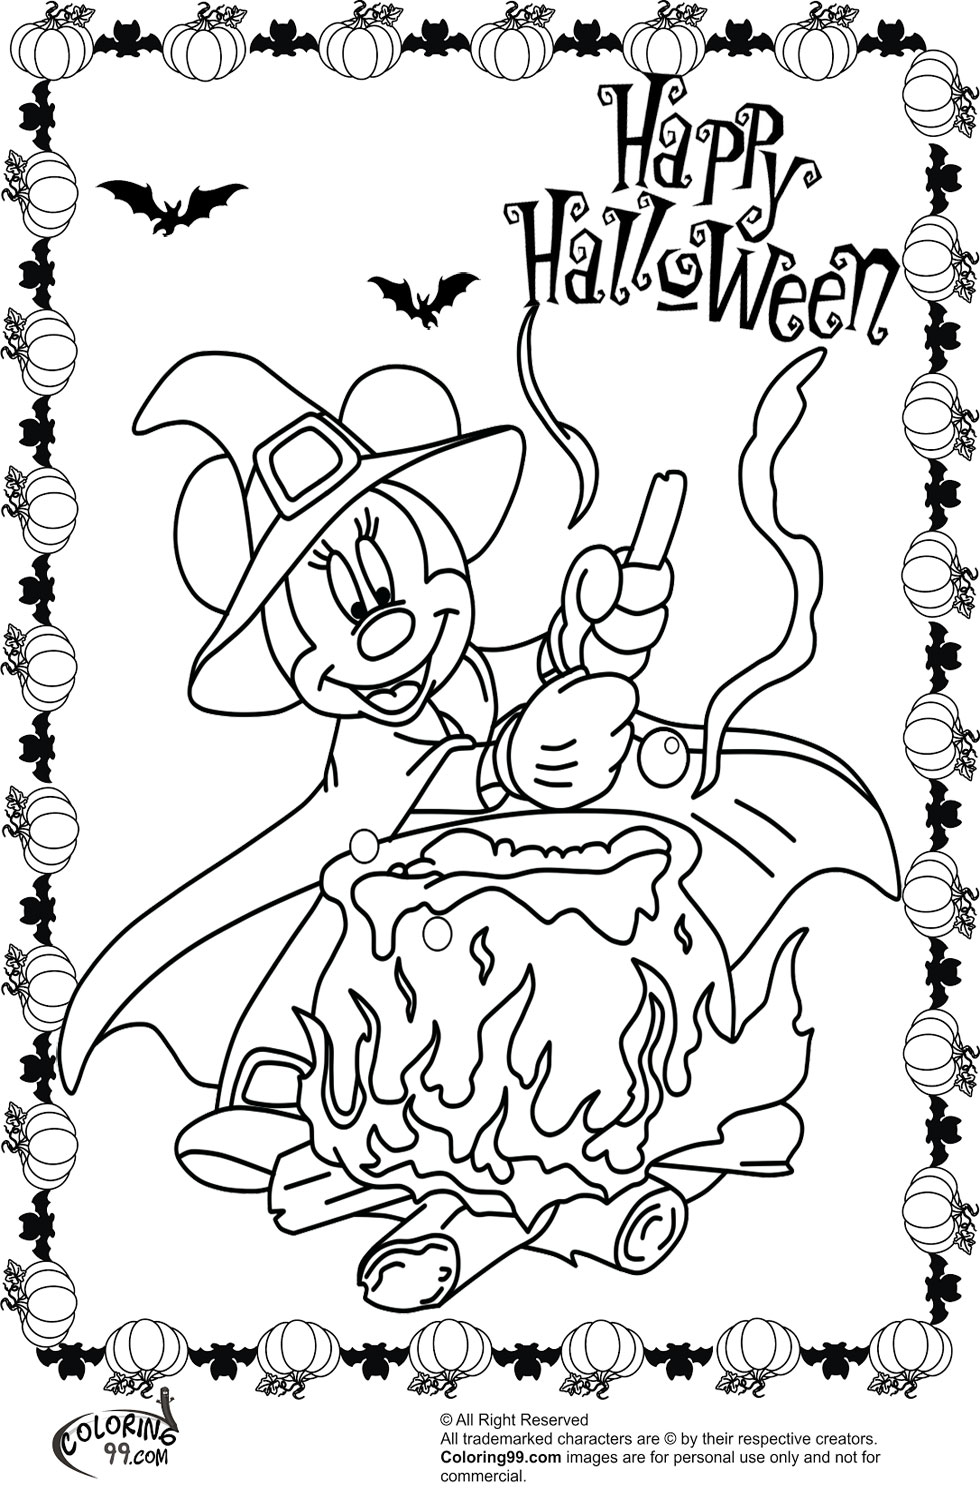 Minnie and Mickey Mouse Coloring Pages for Halloween